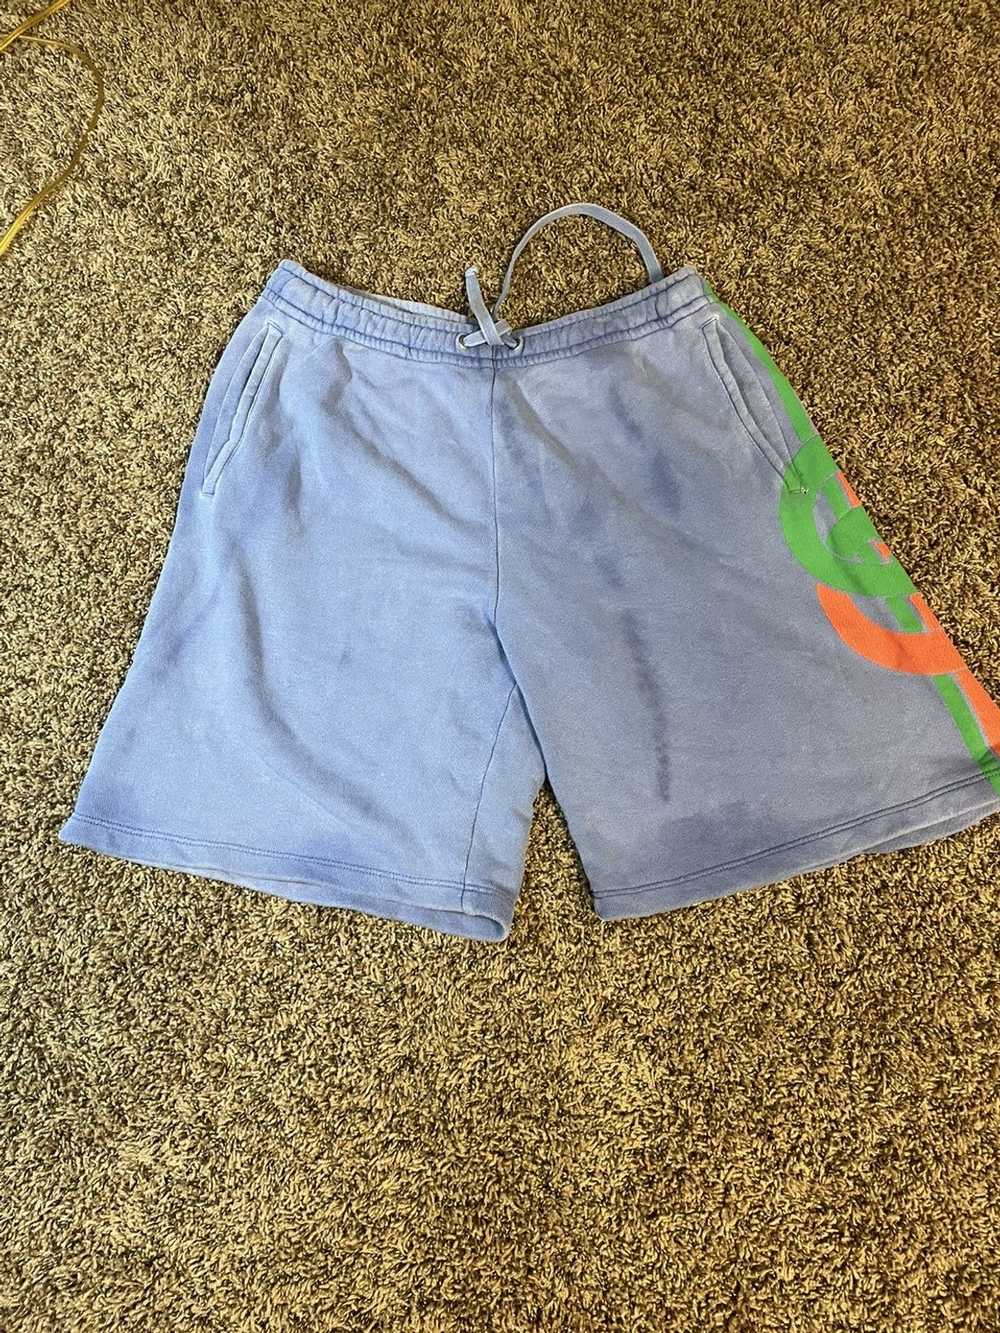 Gucci Gucci Over-Dyed Shorts FW20 - image 3